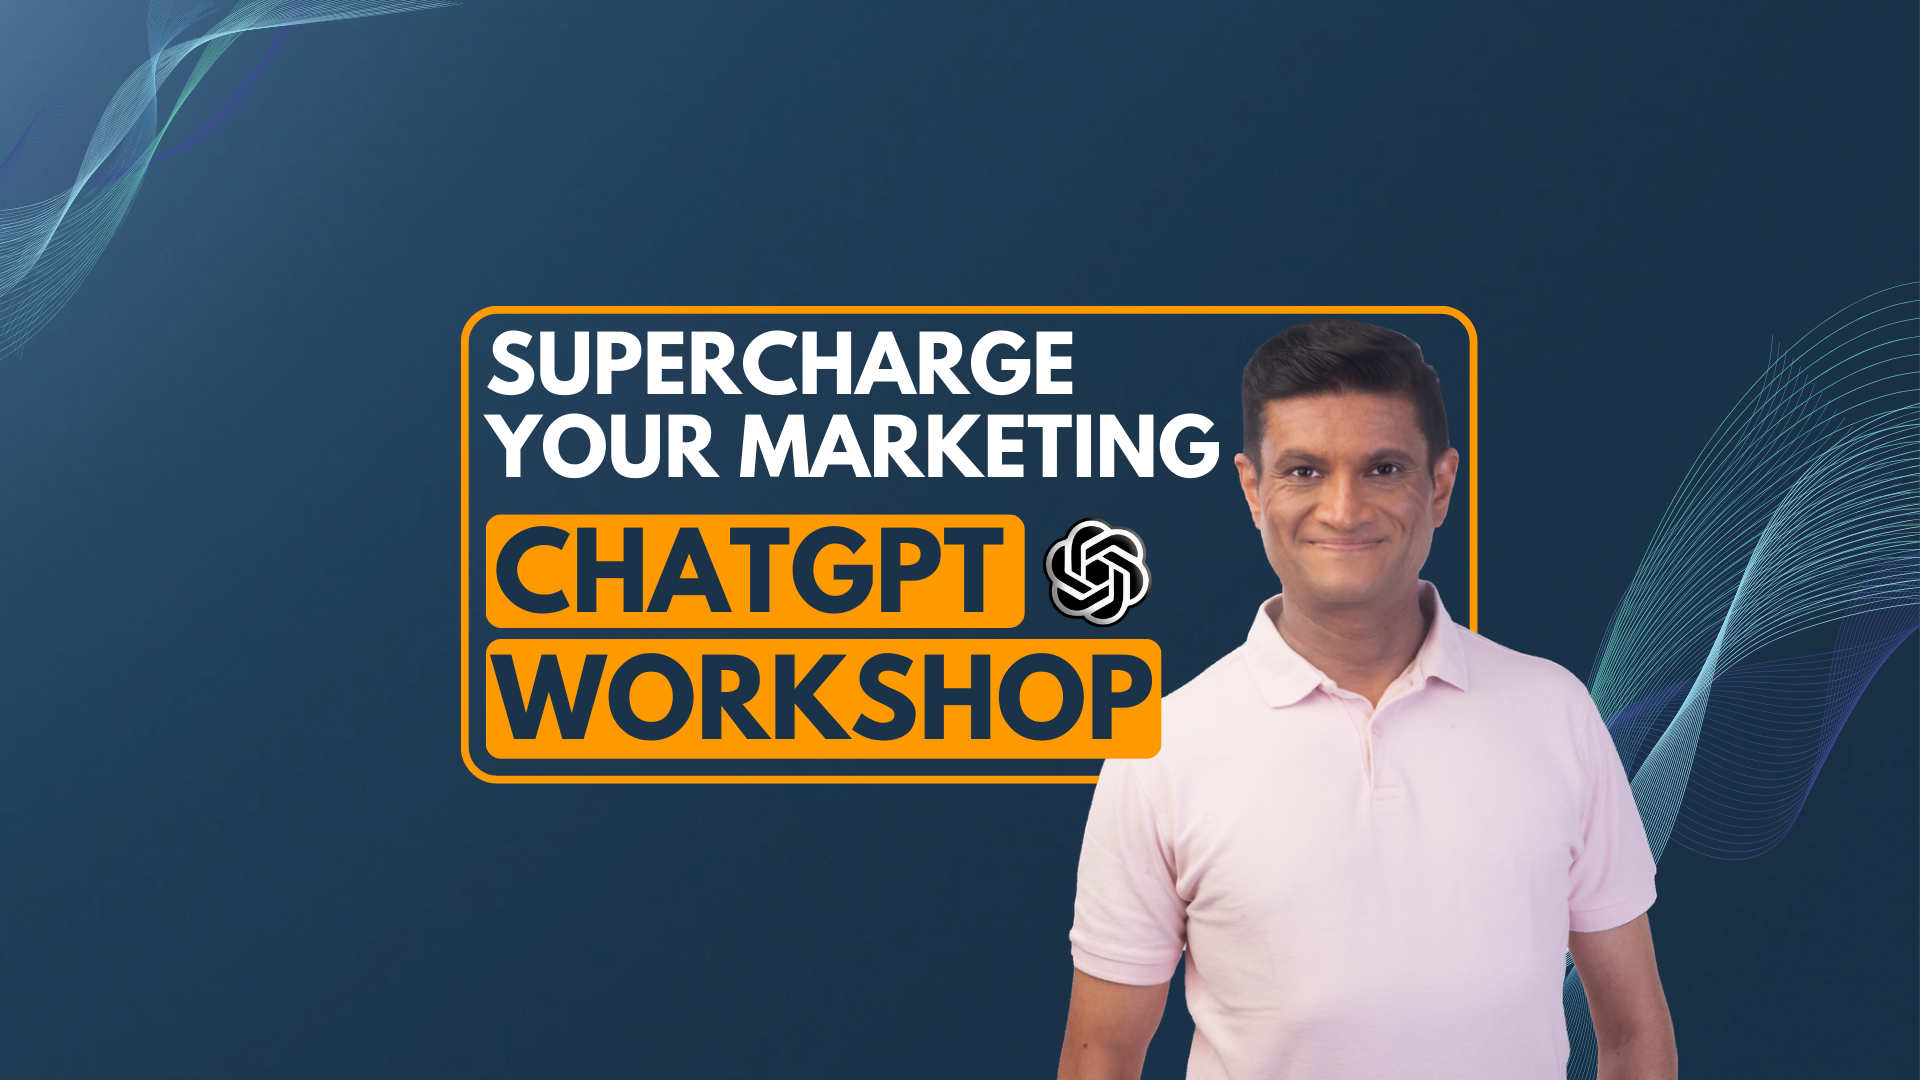 ⚡️Supercharge Your Marketing With ChatGPT